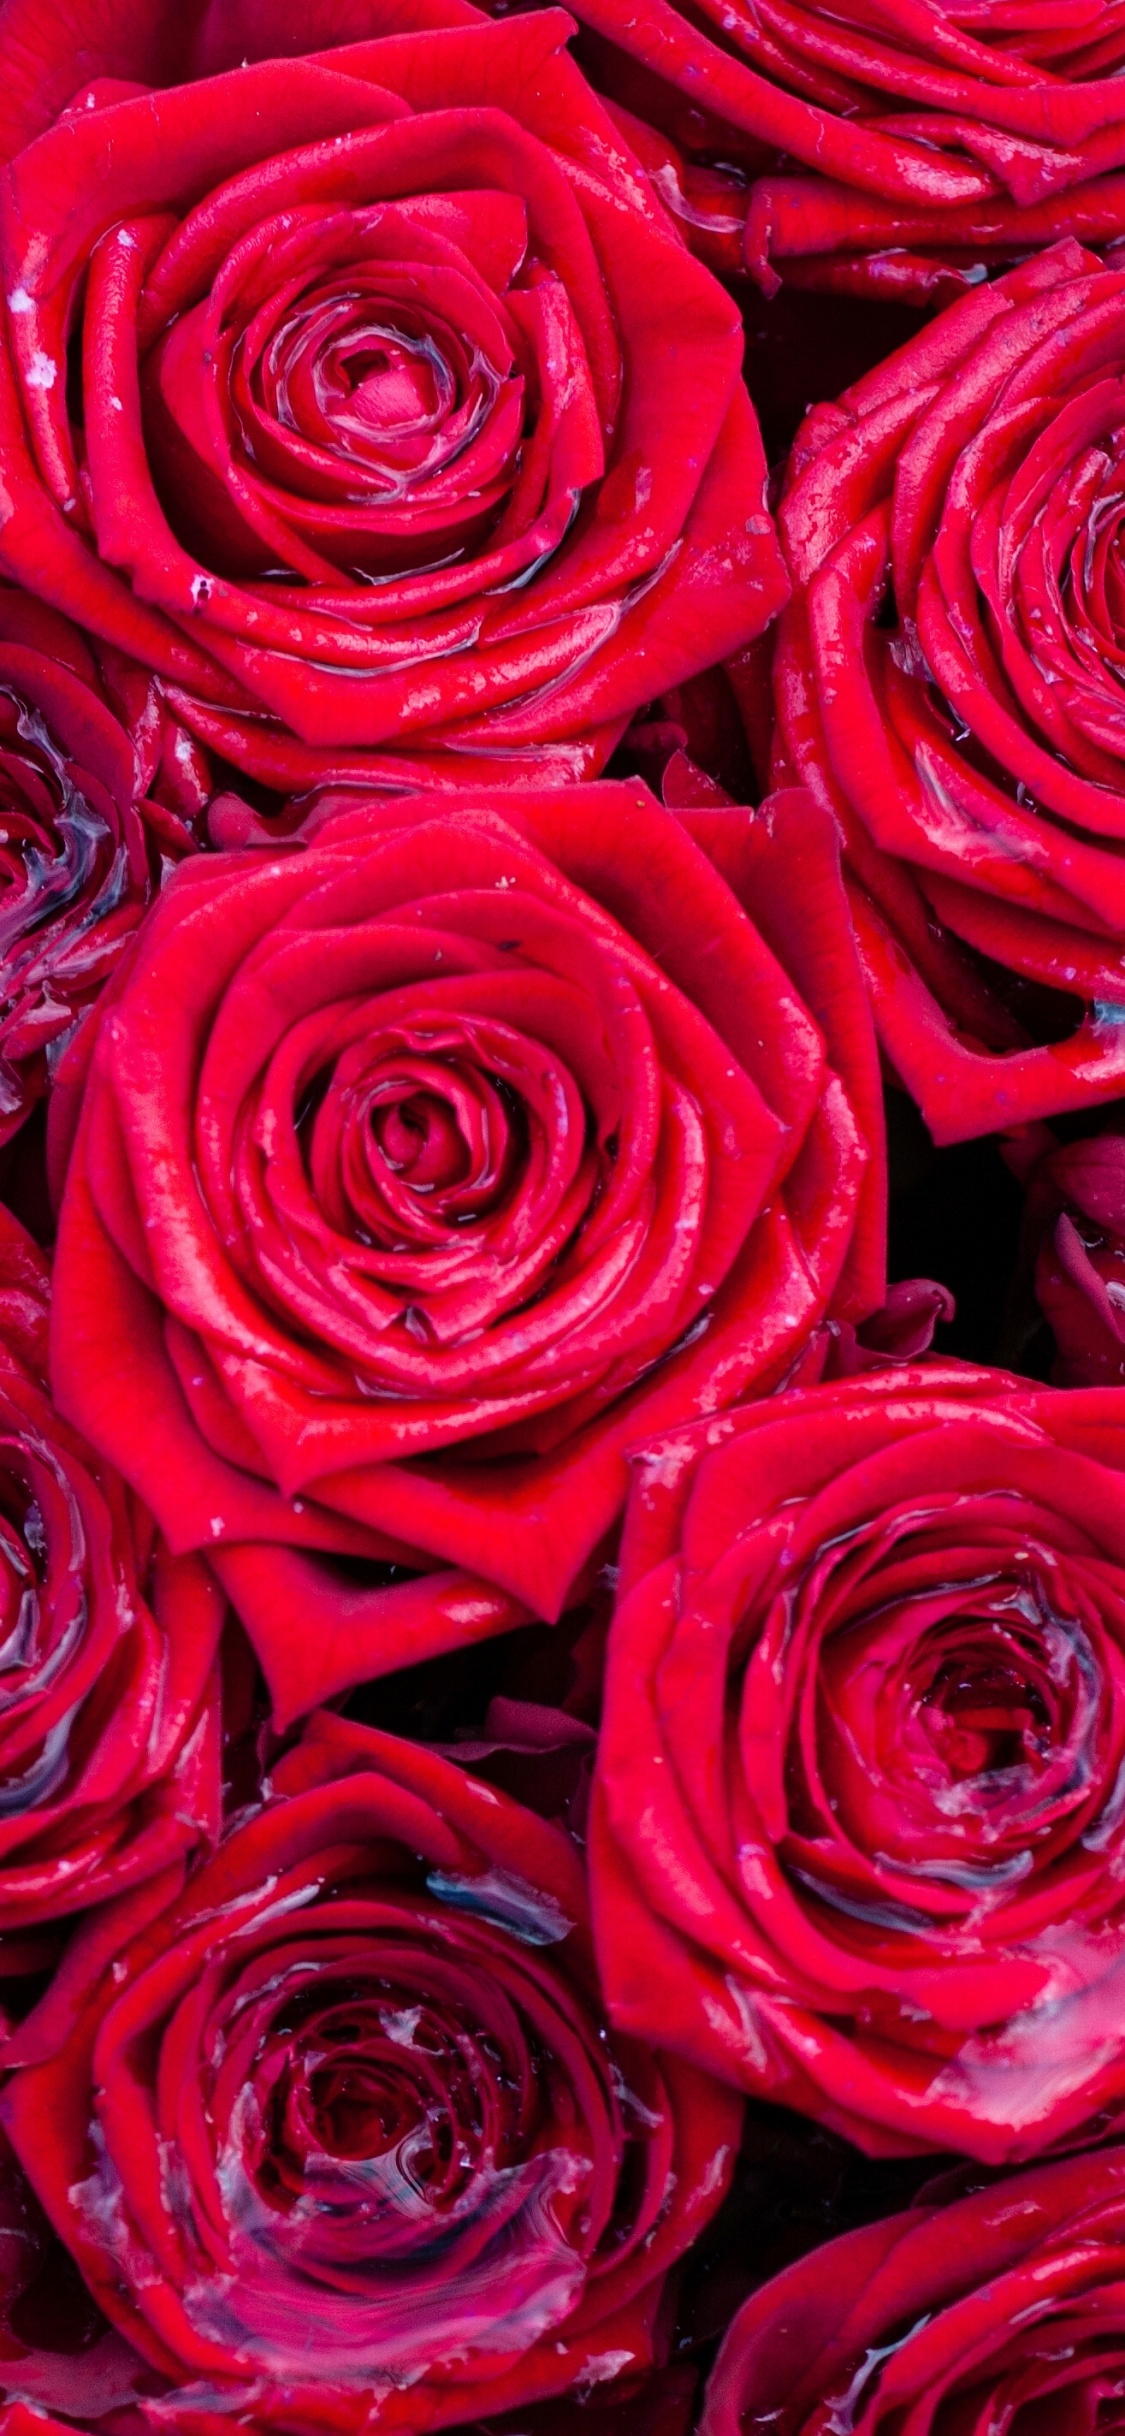 Red Roses in Close up Photography. Wallpaper in 1125x2436 Resolution